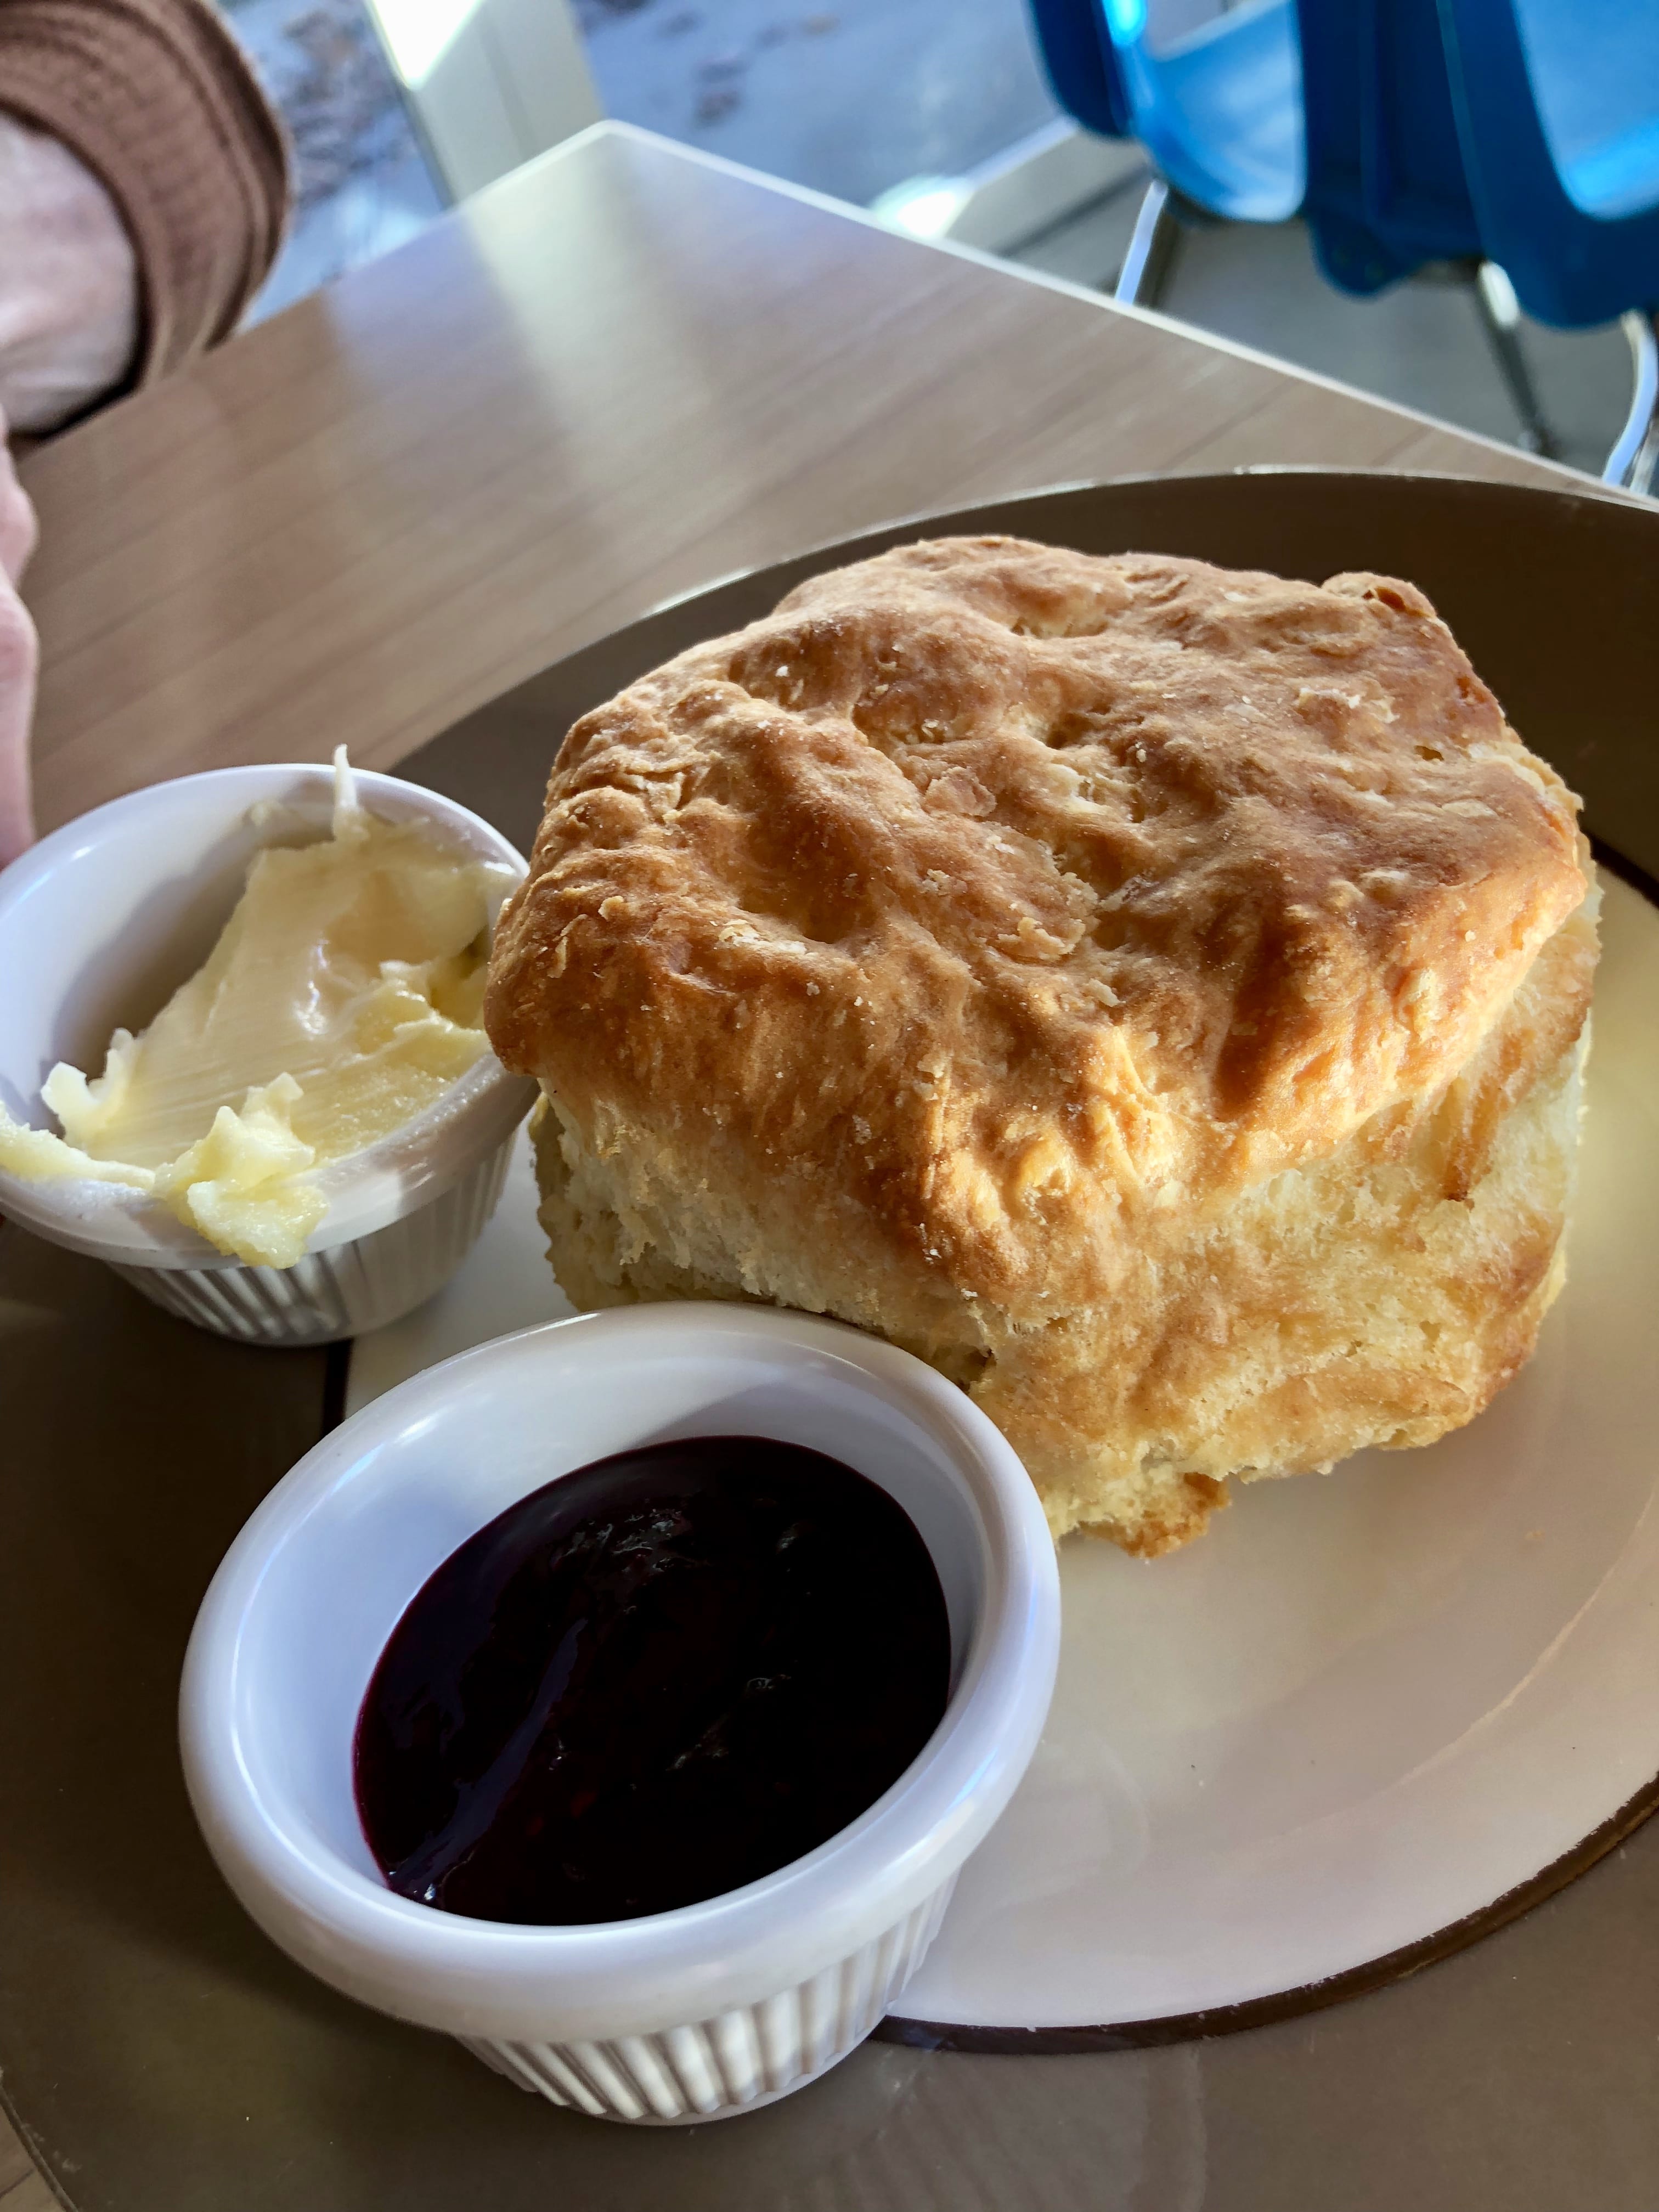 Biscuit and Jam